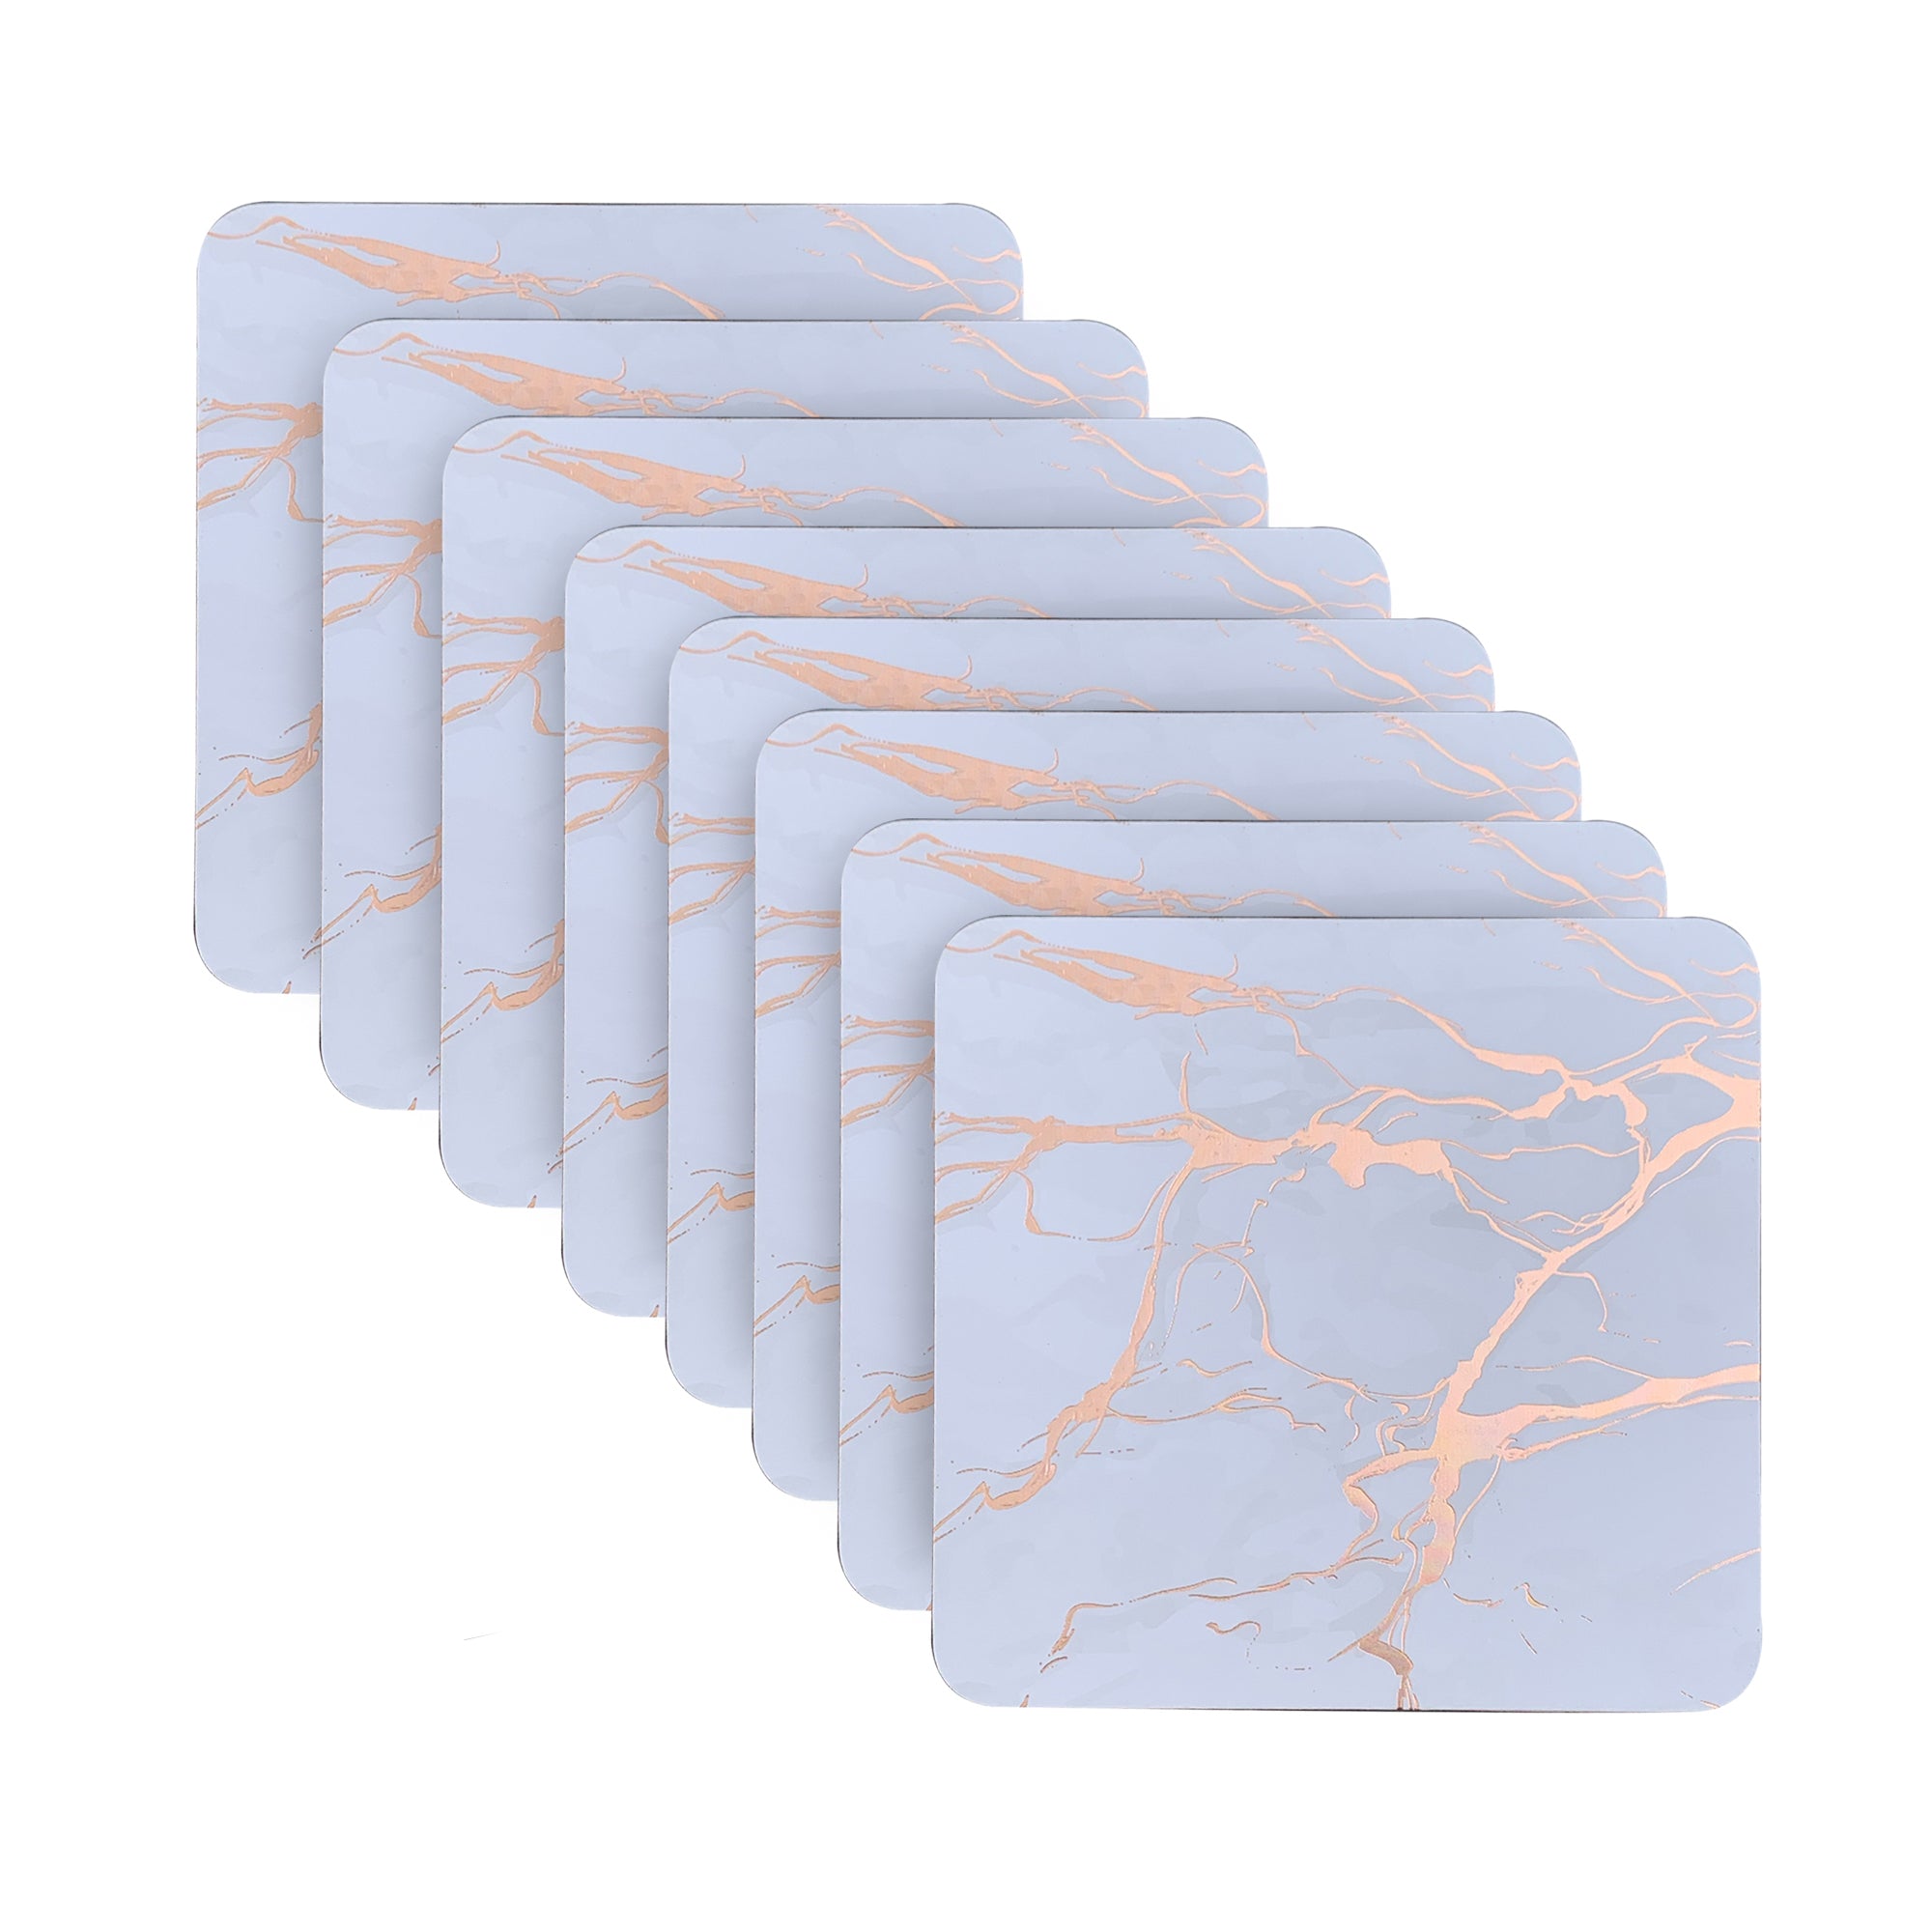 Dainty Home Marble Cork Foil Printed Marble Granite Designed Thick Cork Textured 4" x 4" Square Coasters